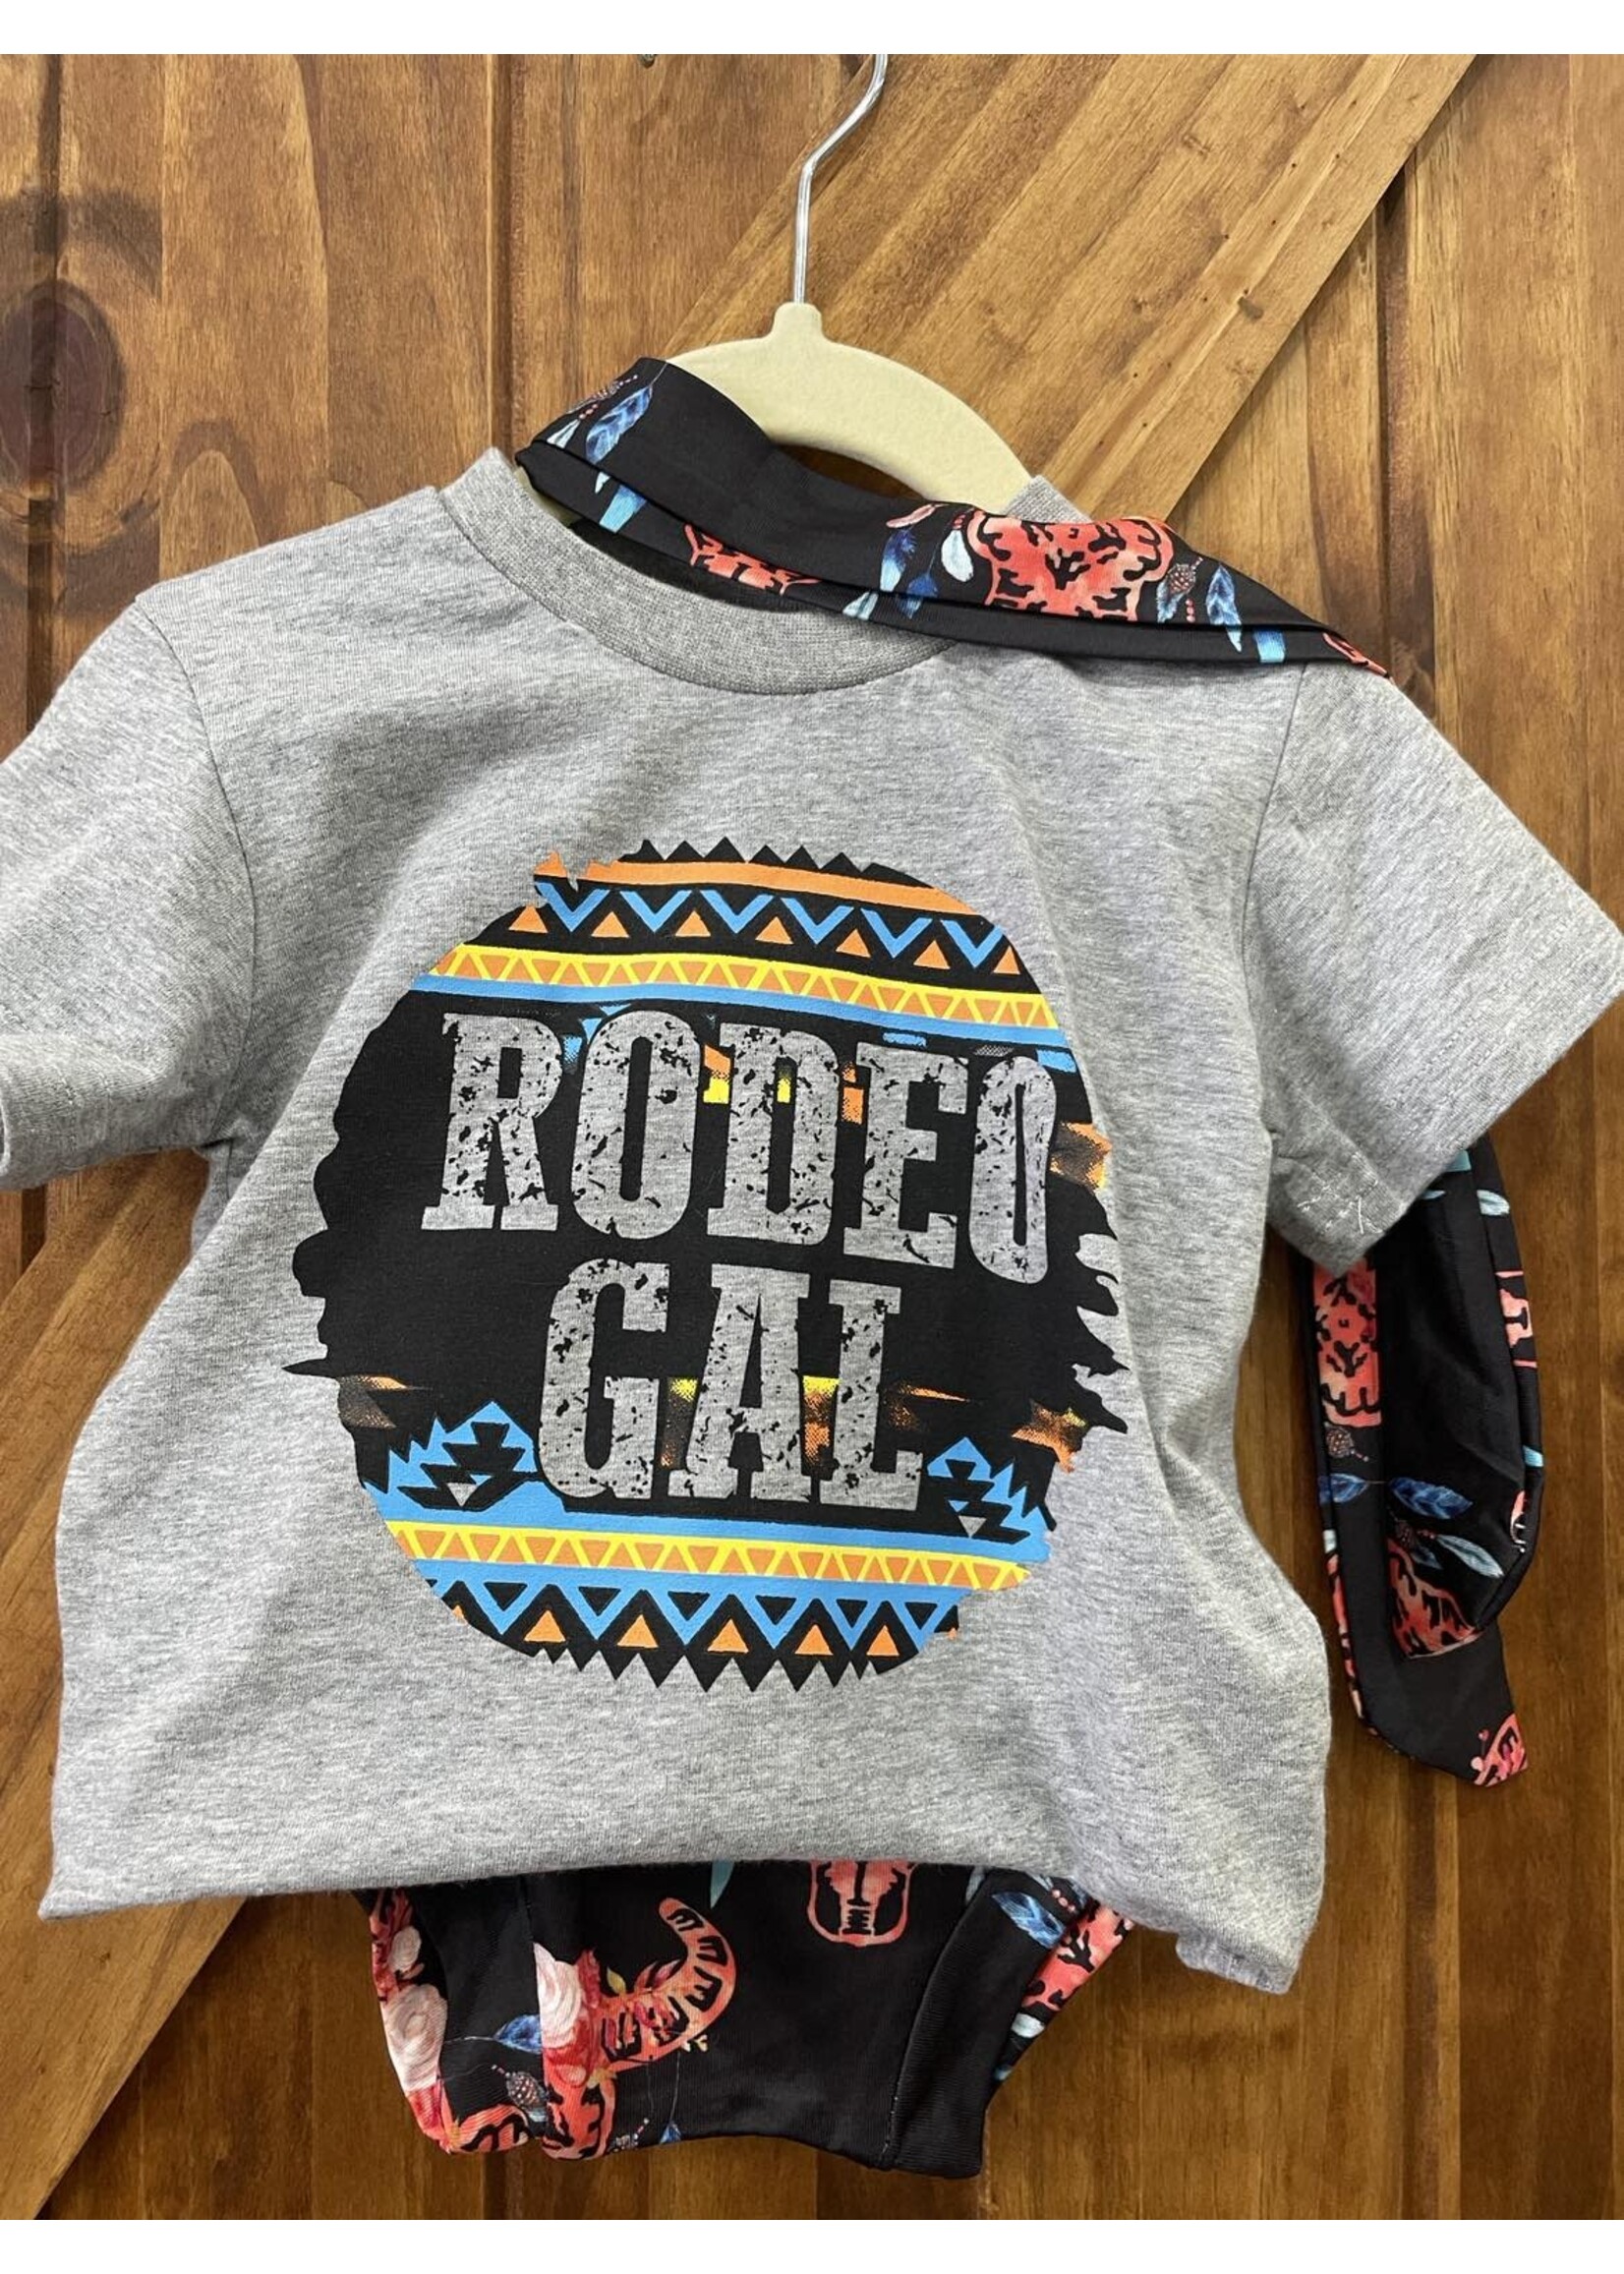 Girls Rodeo Gal Outfit